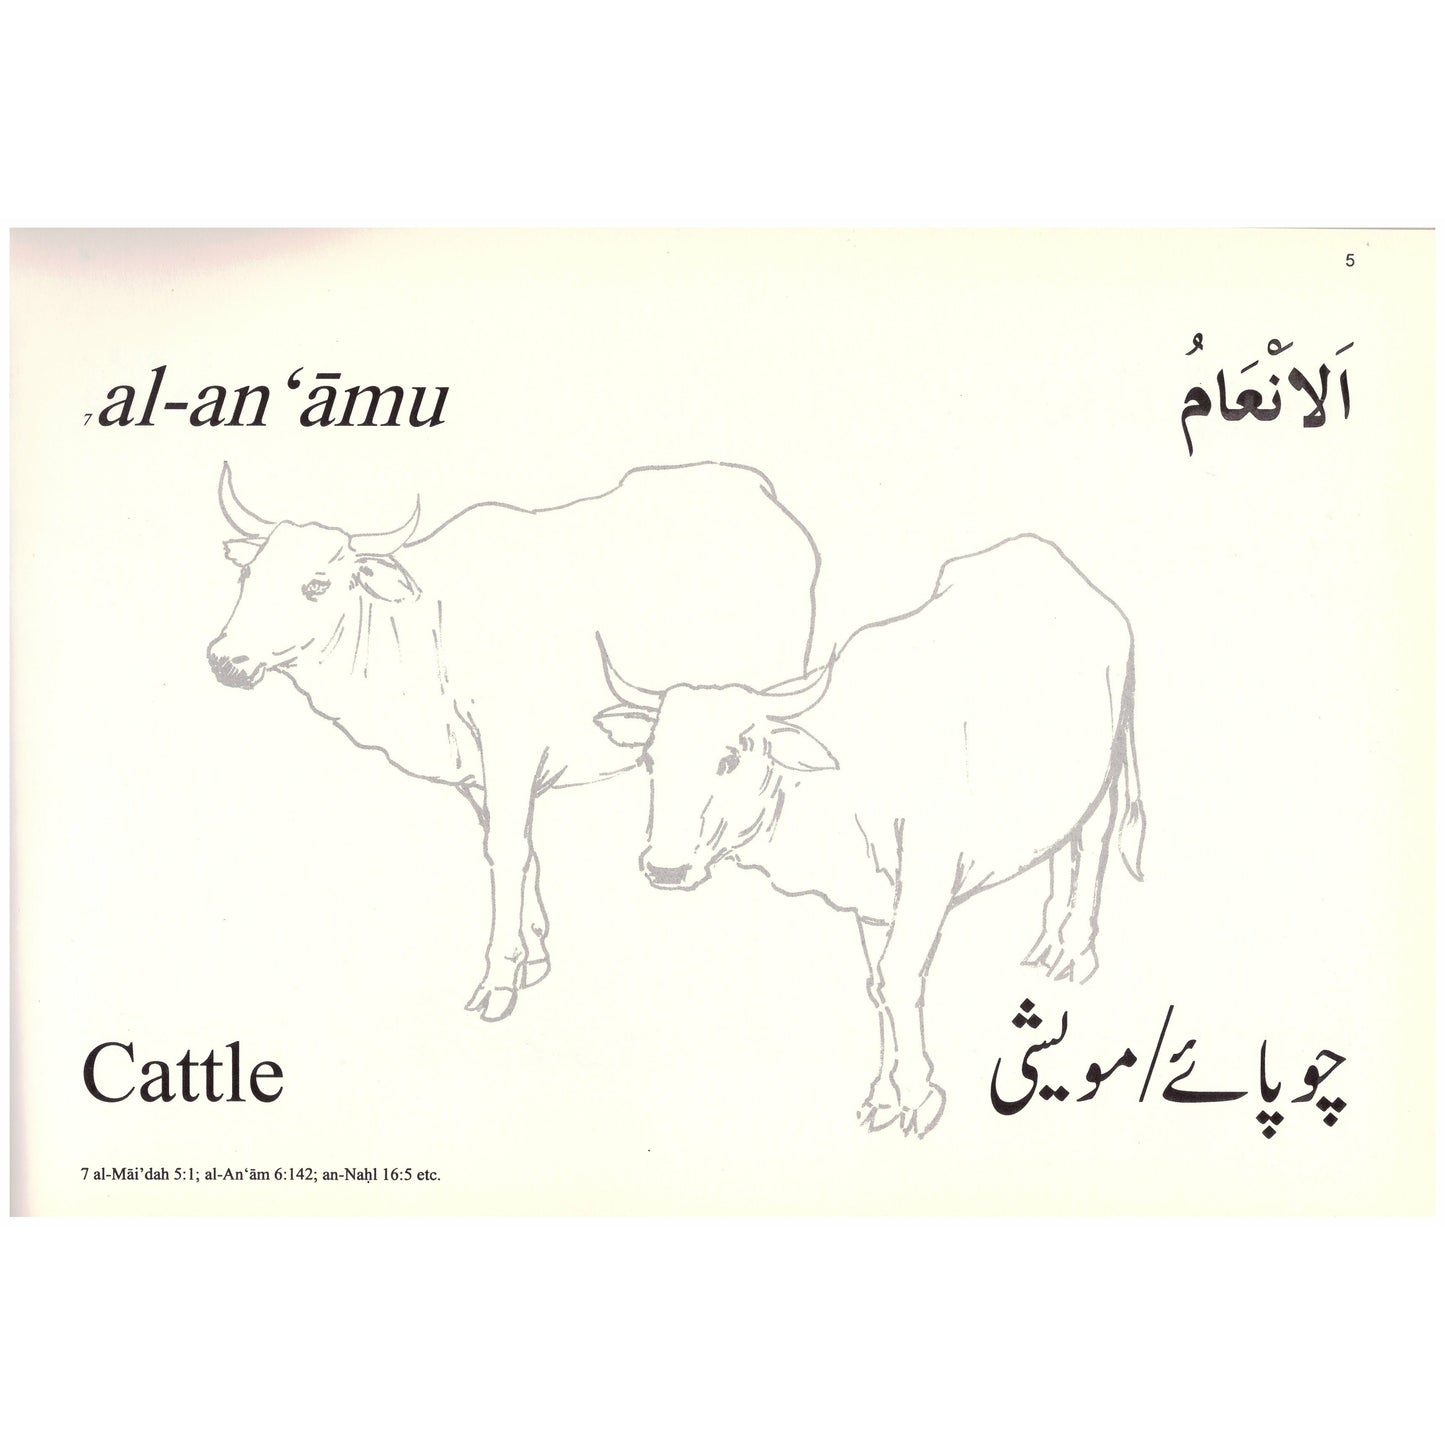 Colouring Book: Animals Mentioned In The Qur'an